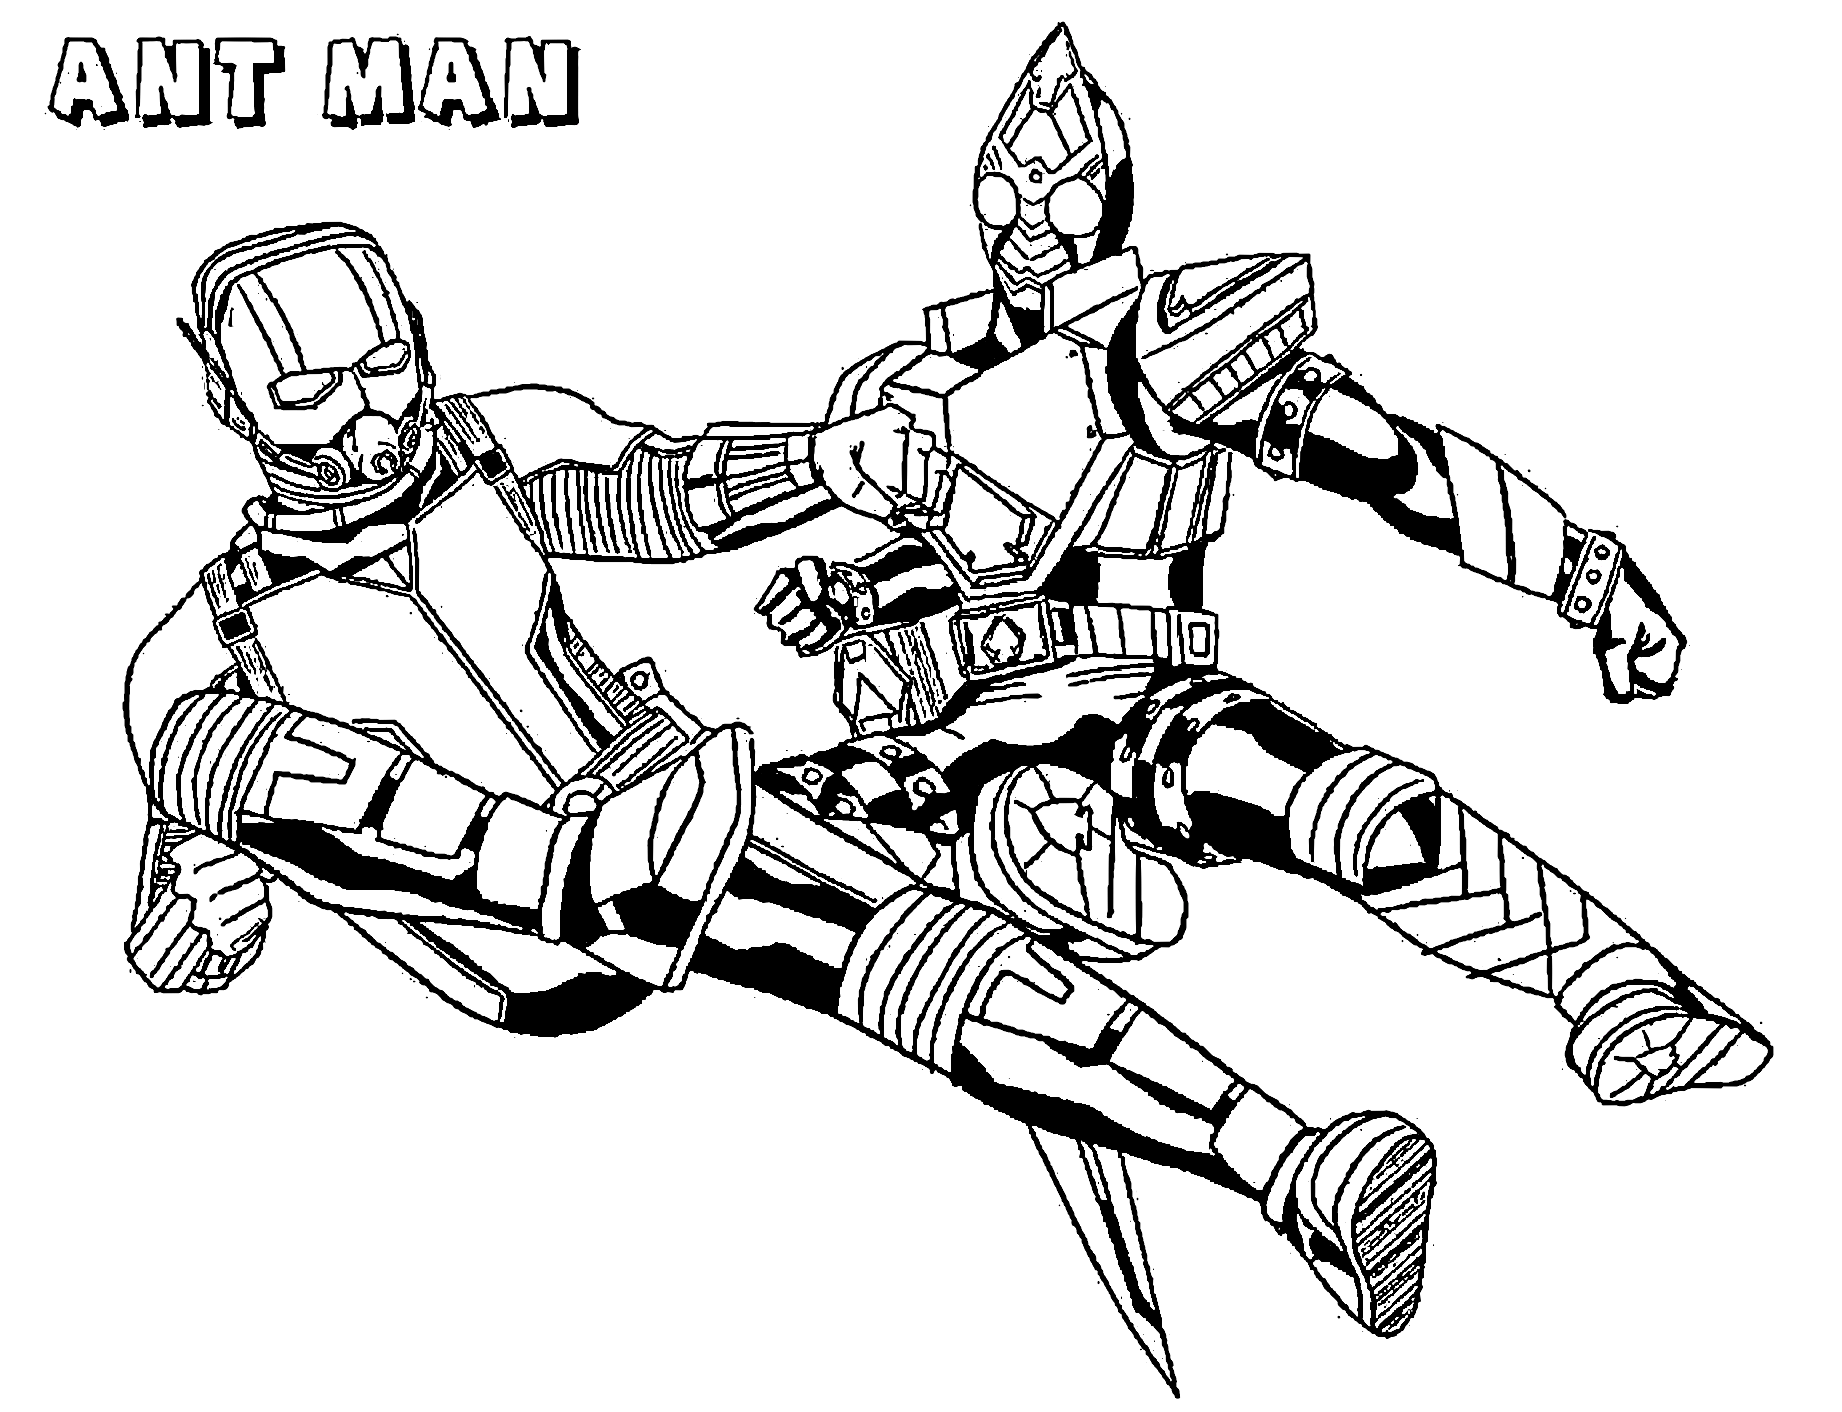 Ant-man fights to Darren Cross in robot form Coloring Page